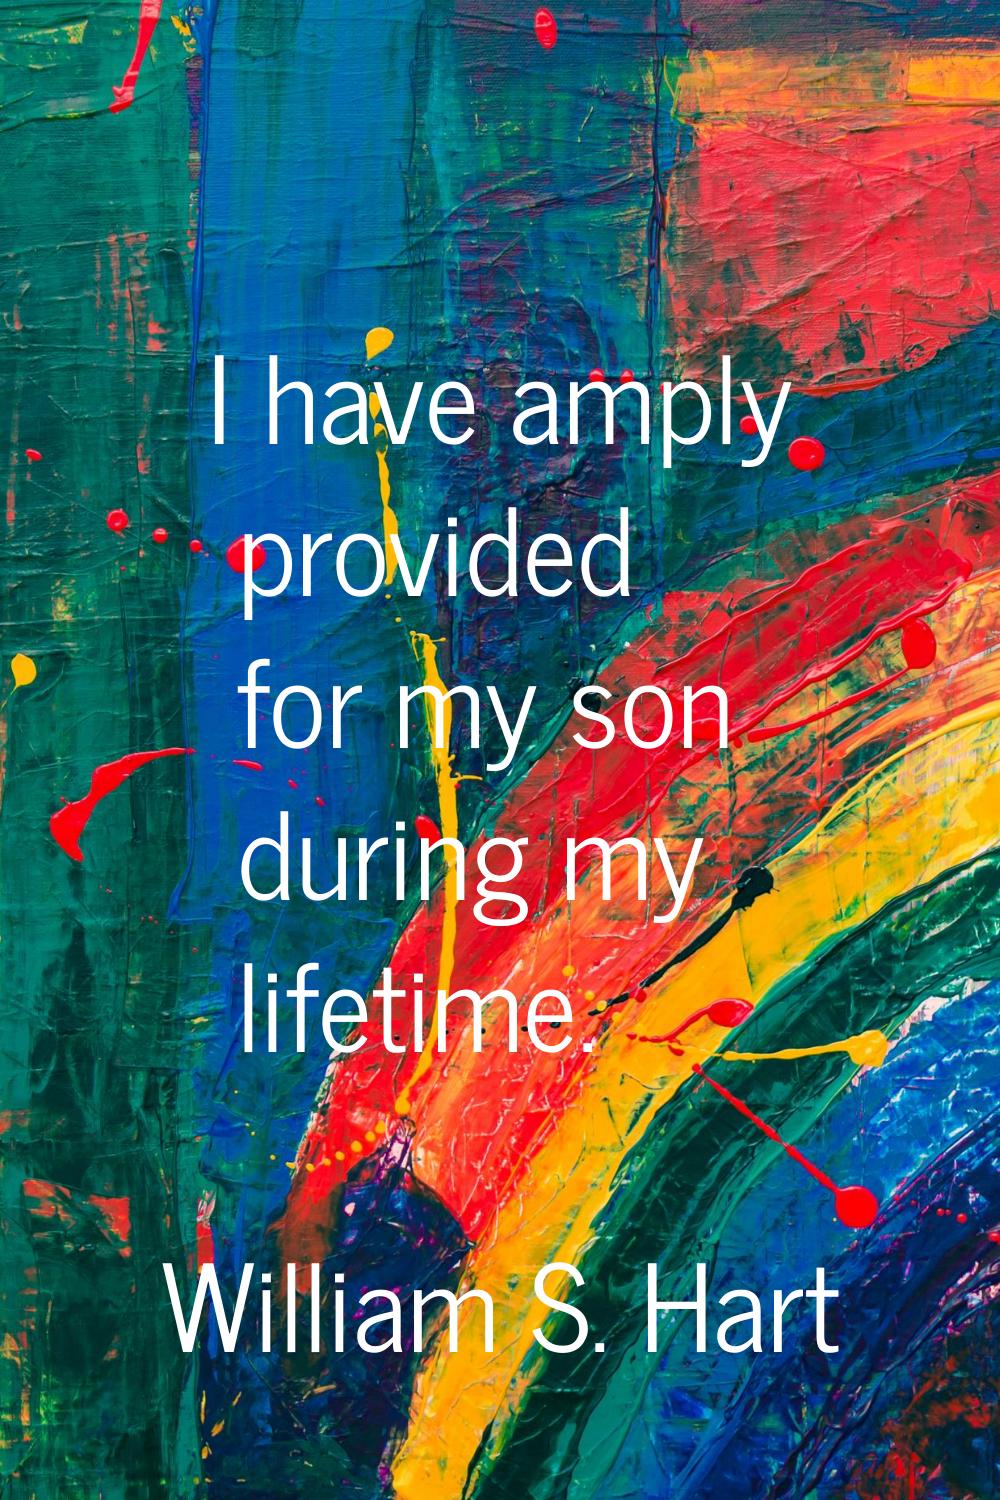 I have amply provided for my son during my lifetime.